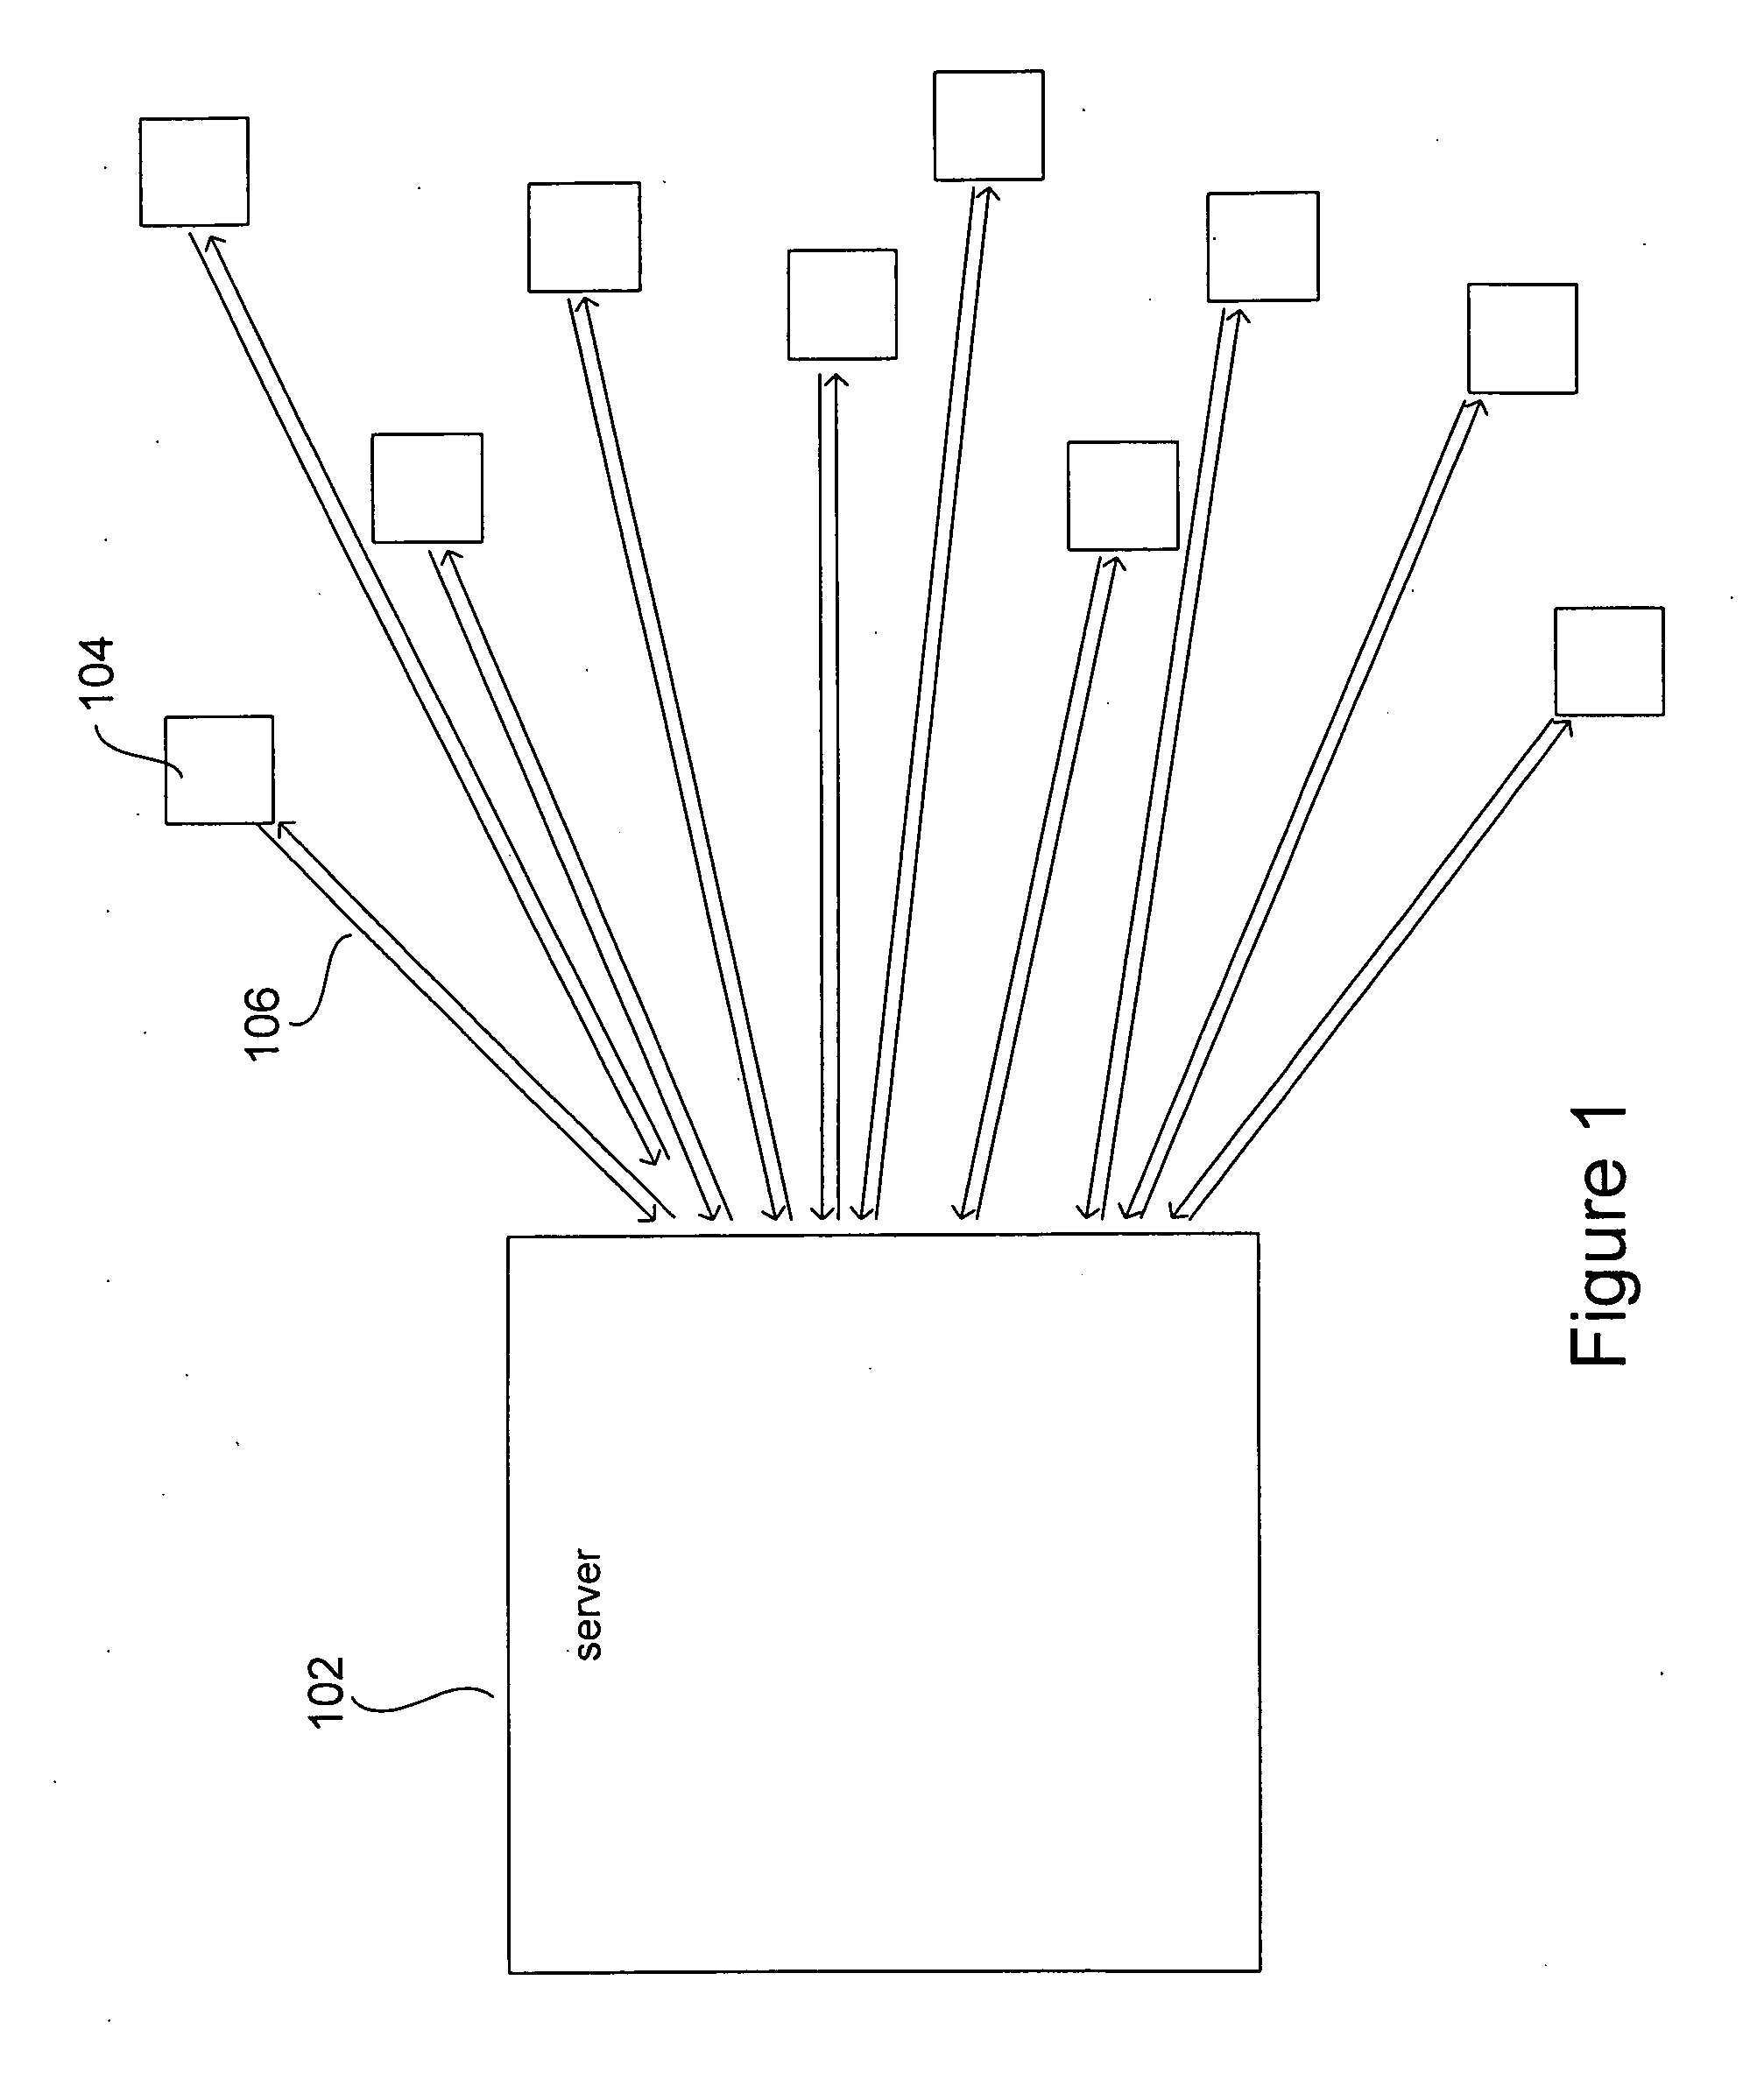 Method and system for protecting a computer system from denial-of-service attacks and other deleterious resource-draining phenomena related to communications